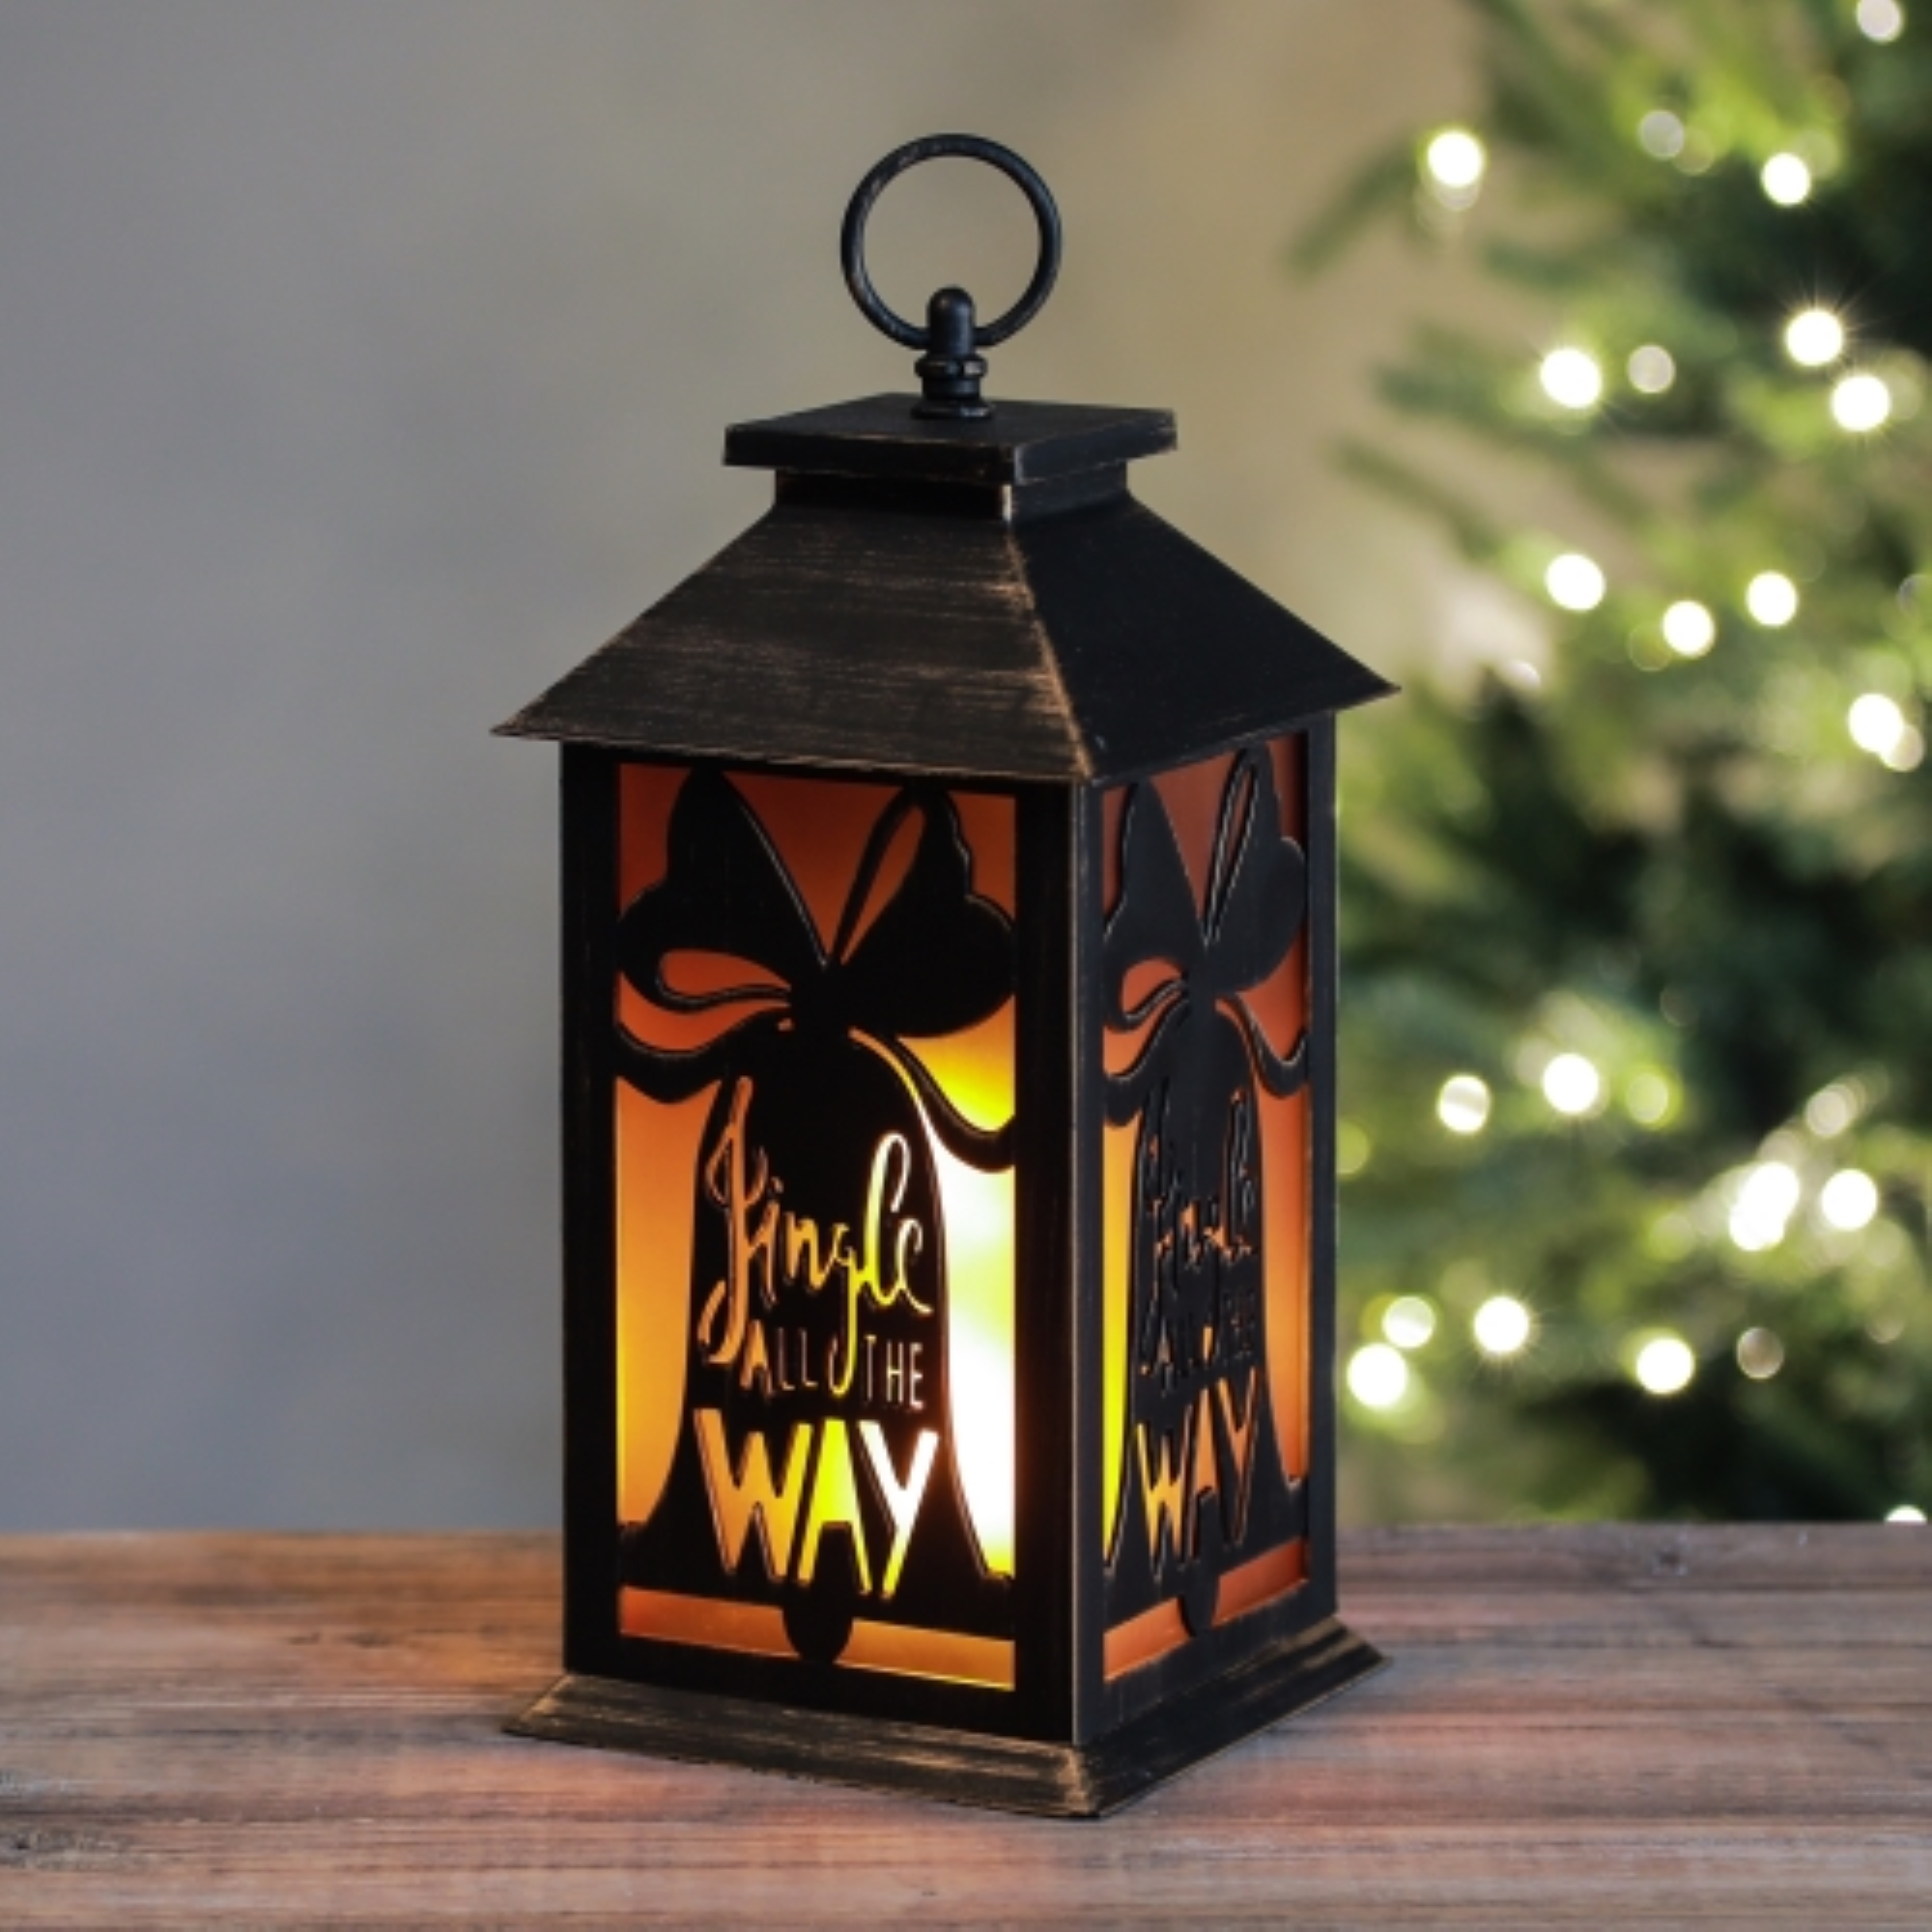 Luxen Home Whdl352 10.8 In. Holiday Bells Led Flame Lantern - Black Brushed Gold